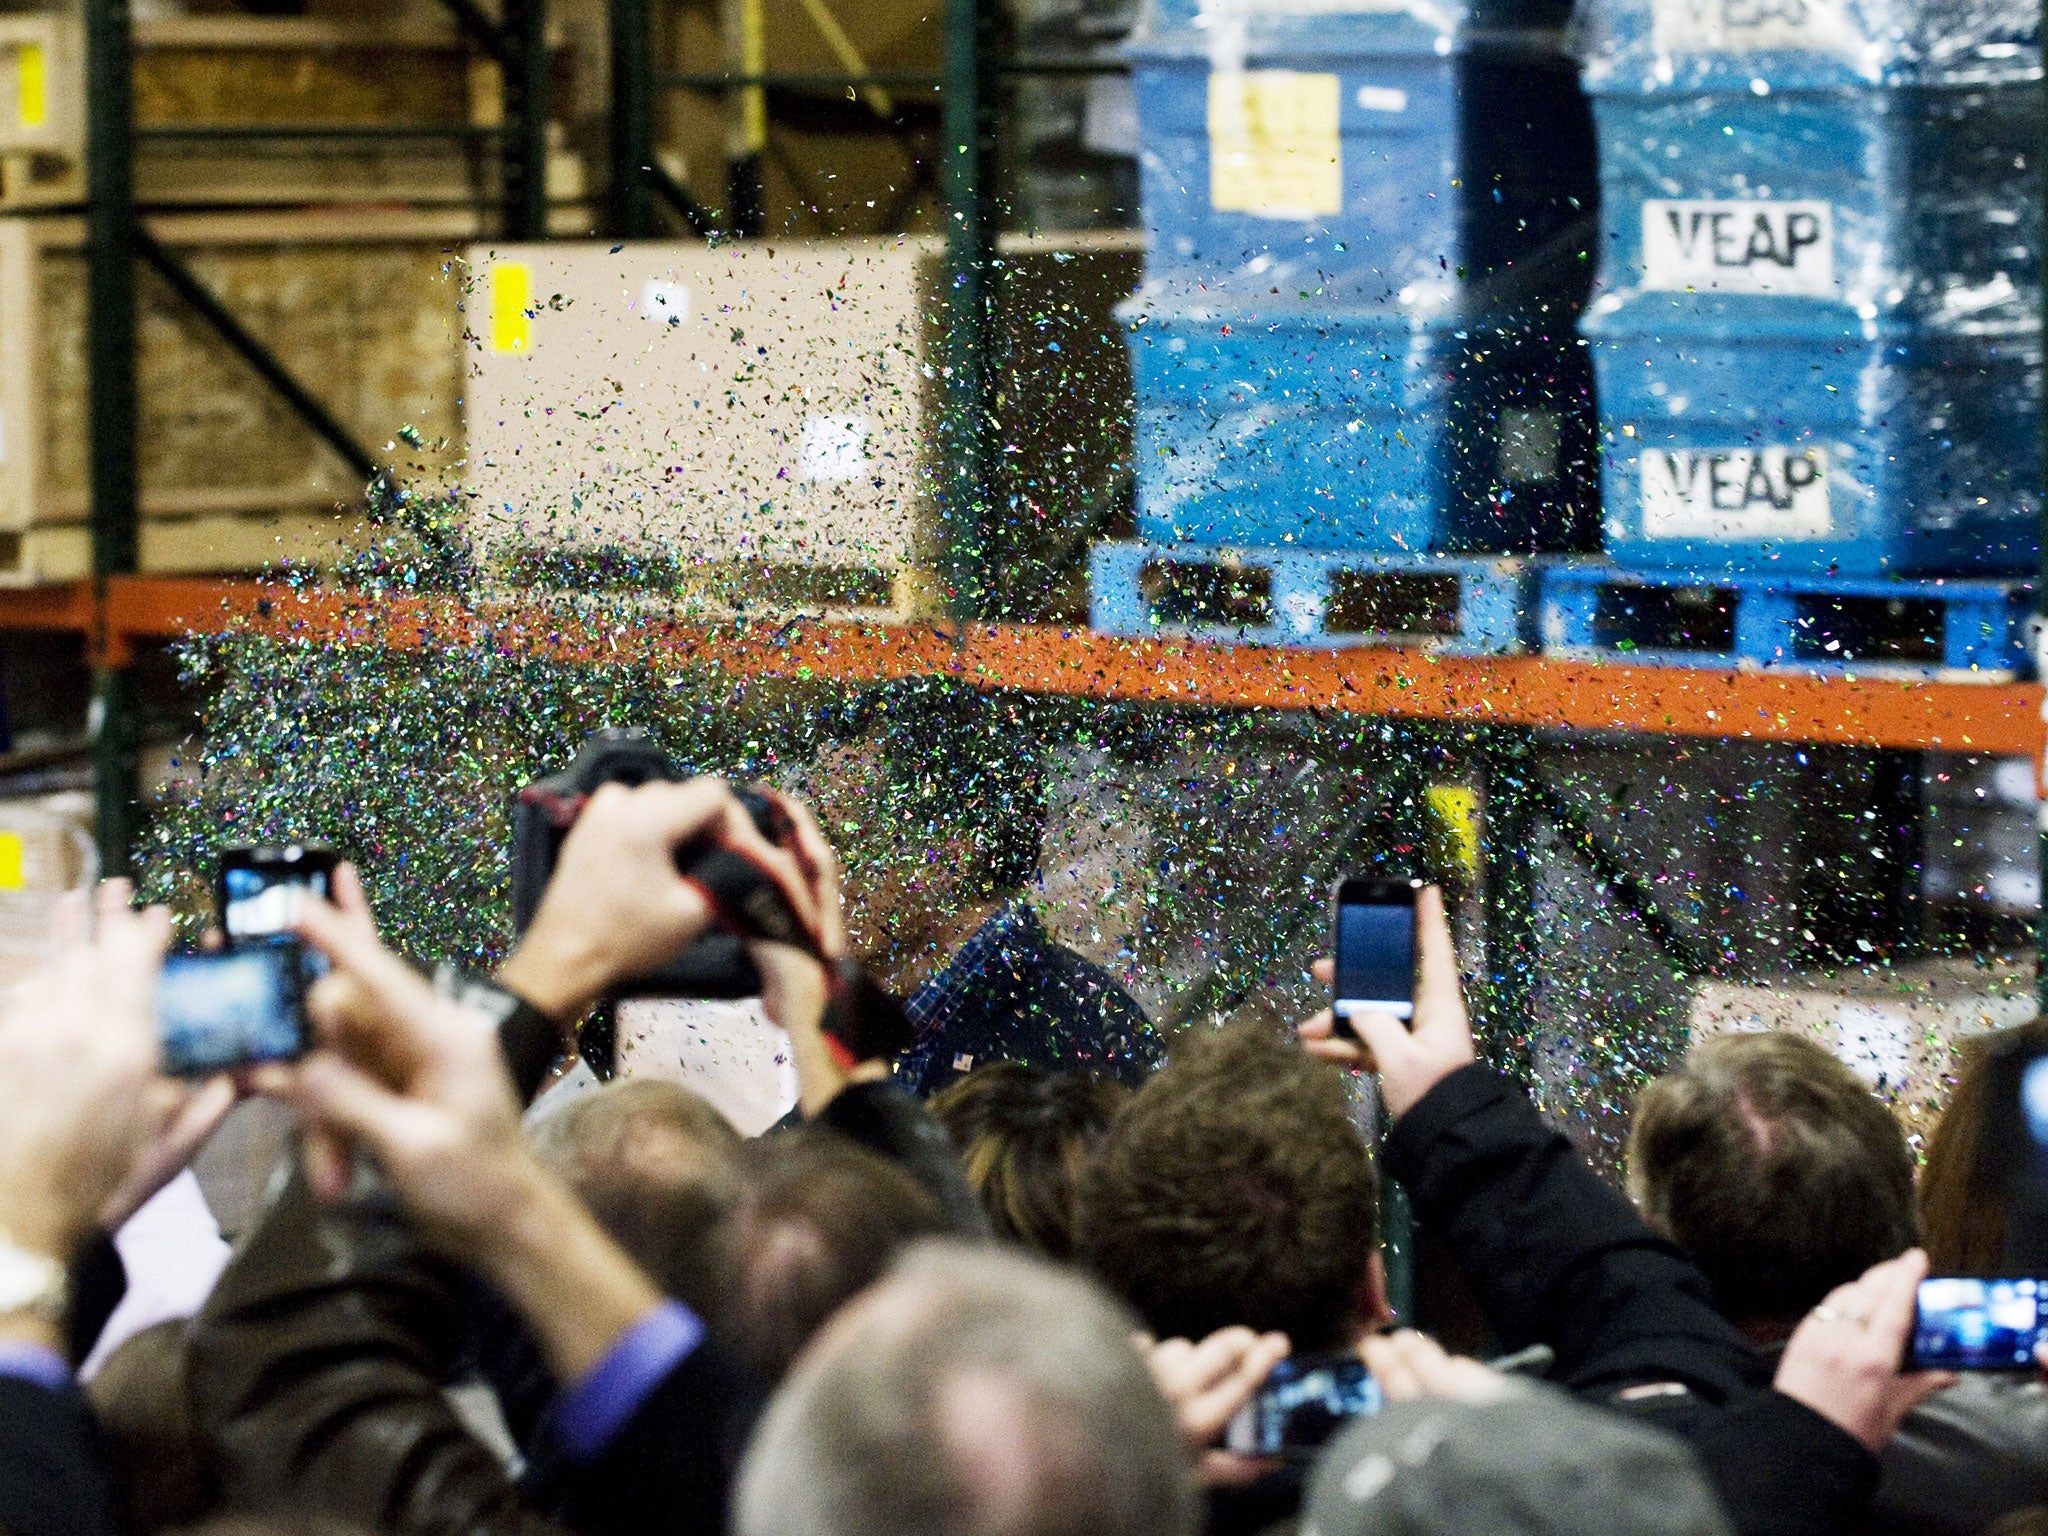 Glitter is tossed into the air as Mitt Romney makes his way toward the stage during a rally in 2012